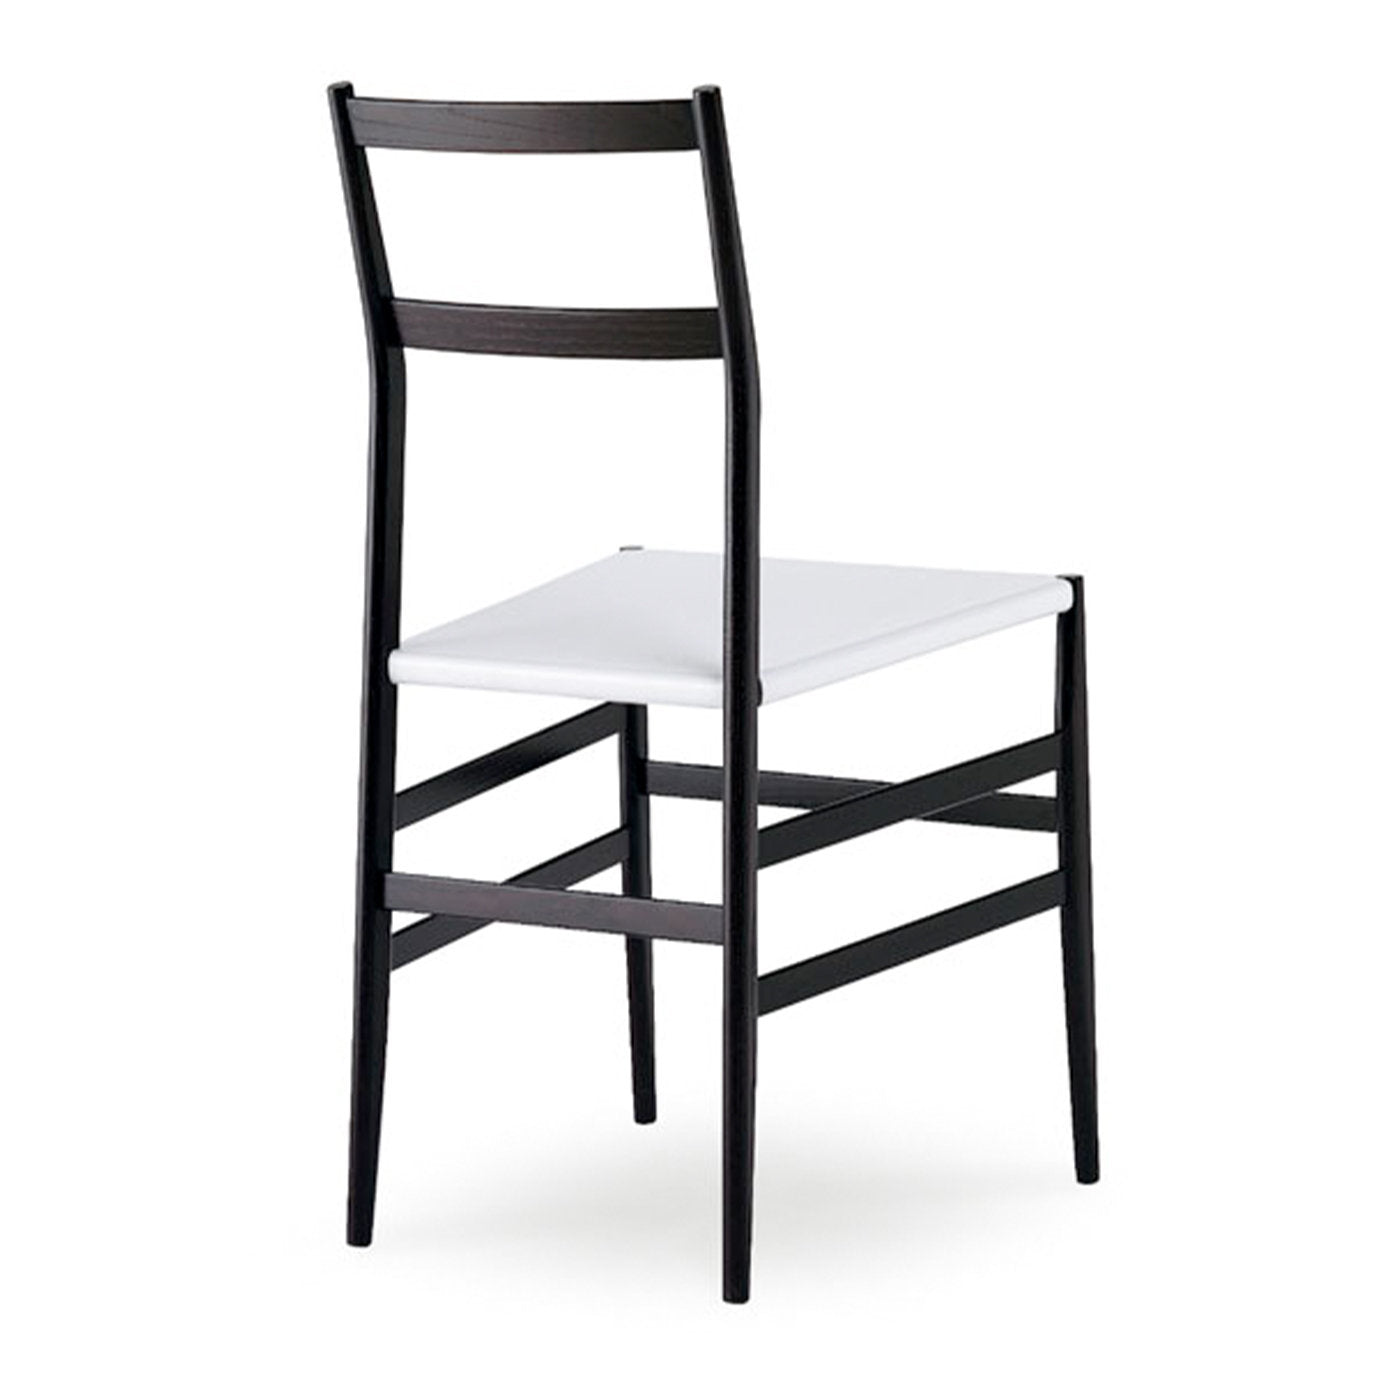 Piuma Black Chair with White Leather Seat - Alternative view 1